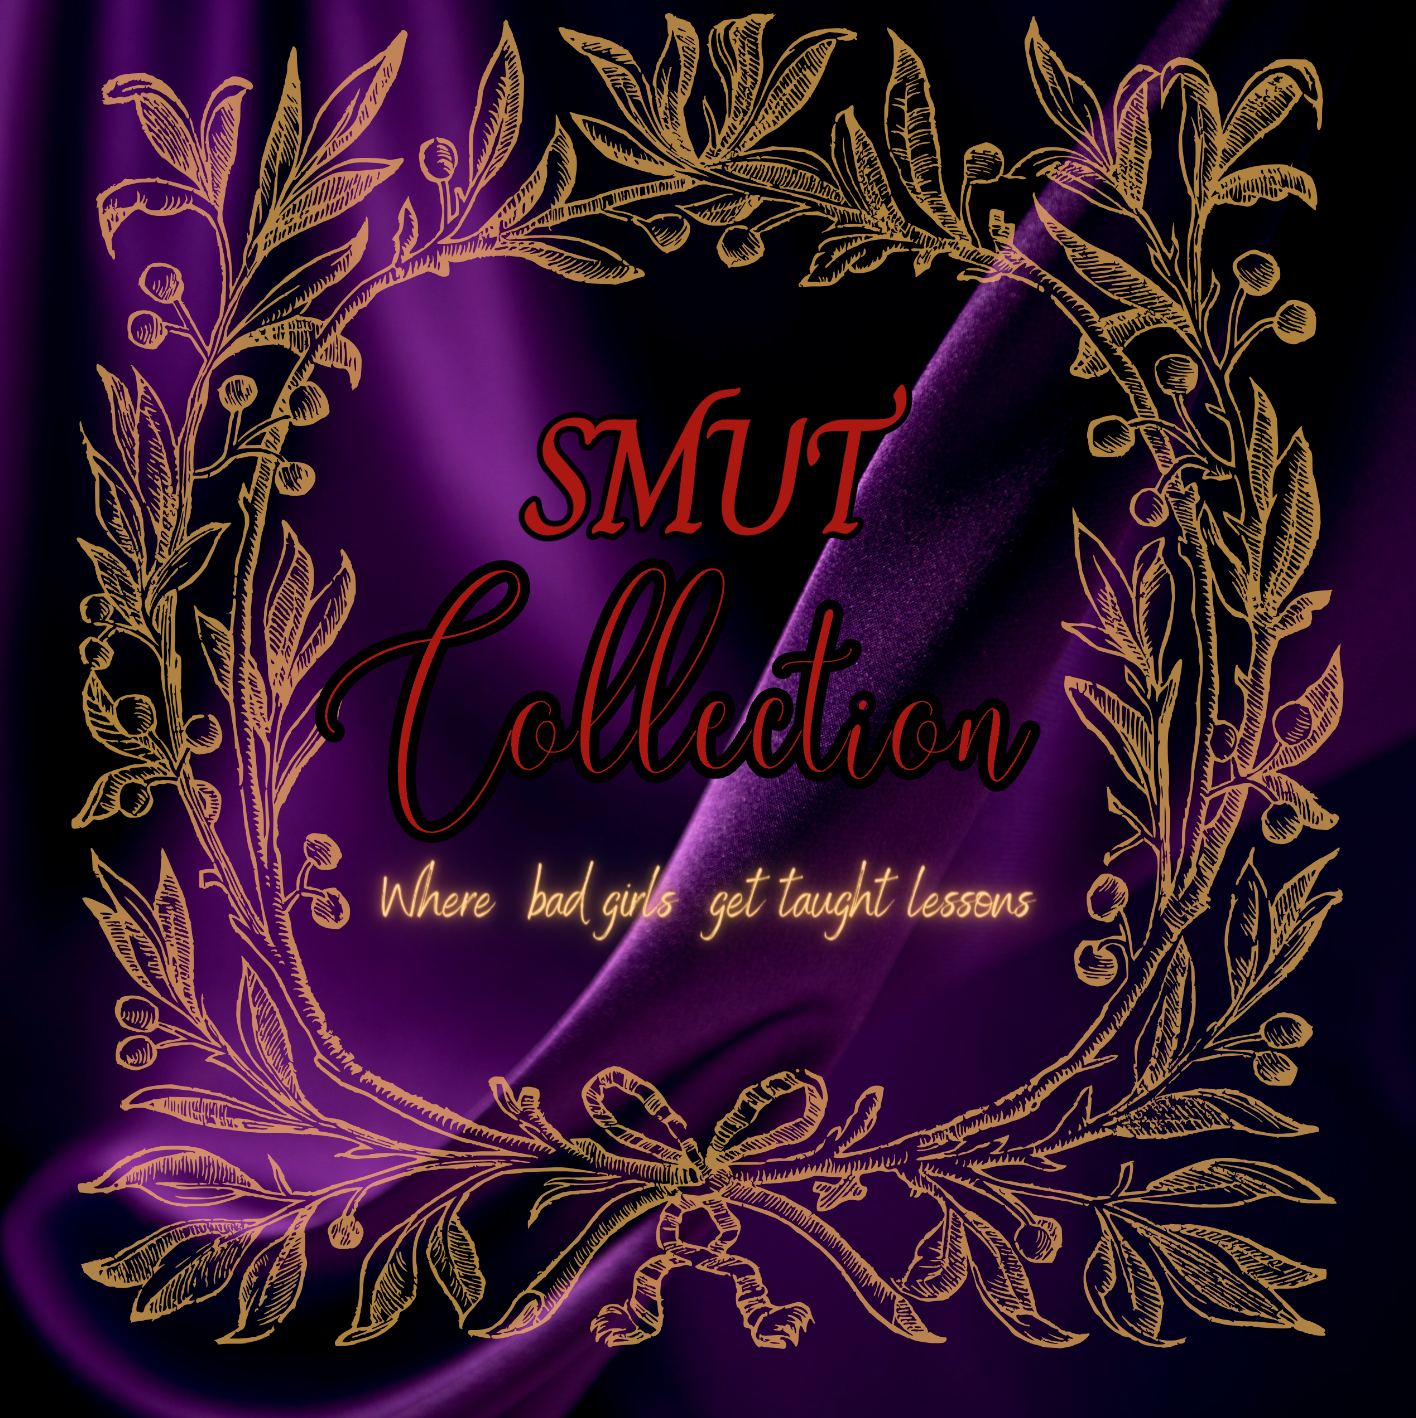 Smut Collection ❤️‍🔥